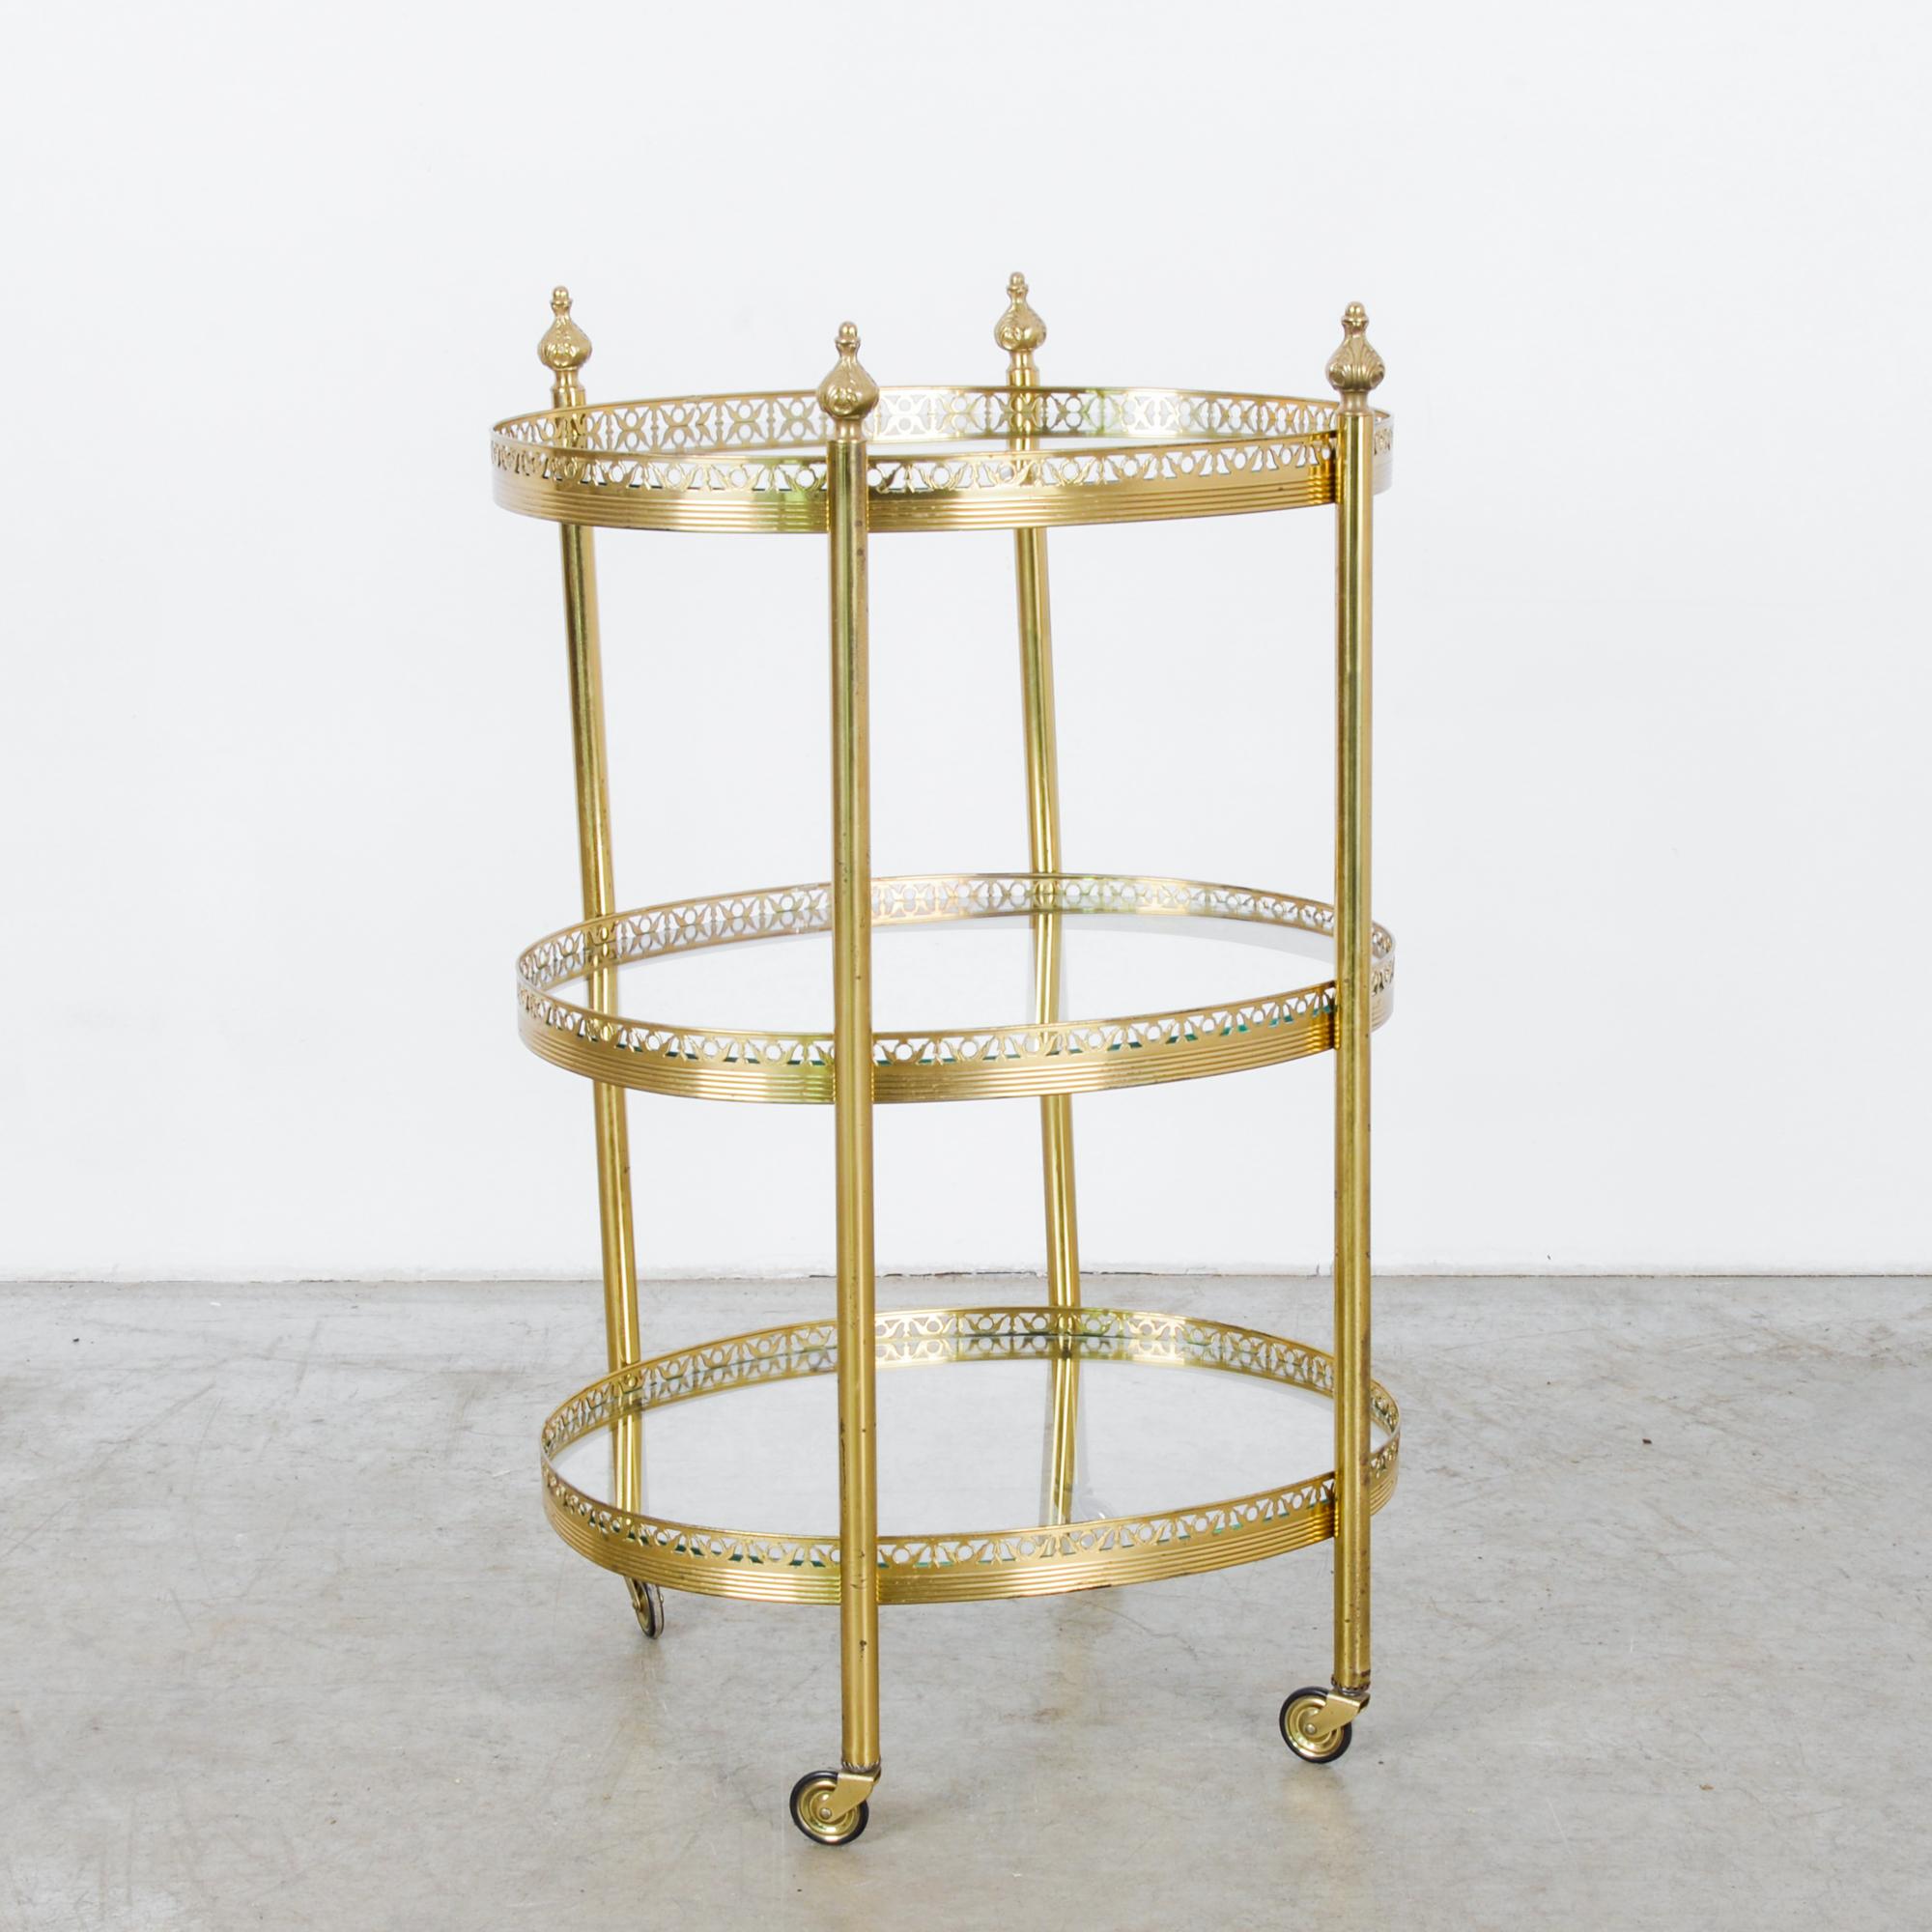 A vintage brass bar cart on wheels from France, circa 1960. Three tiers of ovoid glass shelves ringed by avian motif in silhouette. Four slender legs capped by budding petals support the delicate body of this charming cart. Plenty of space to hold